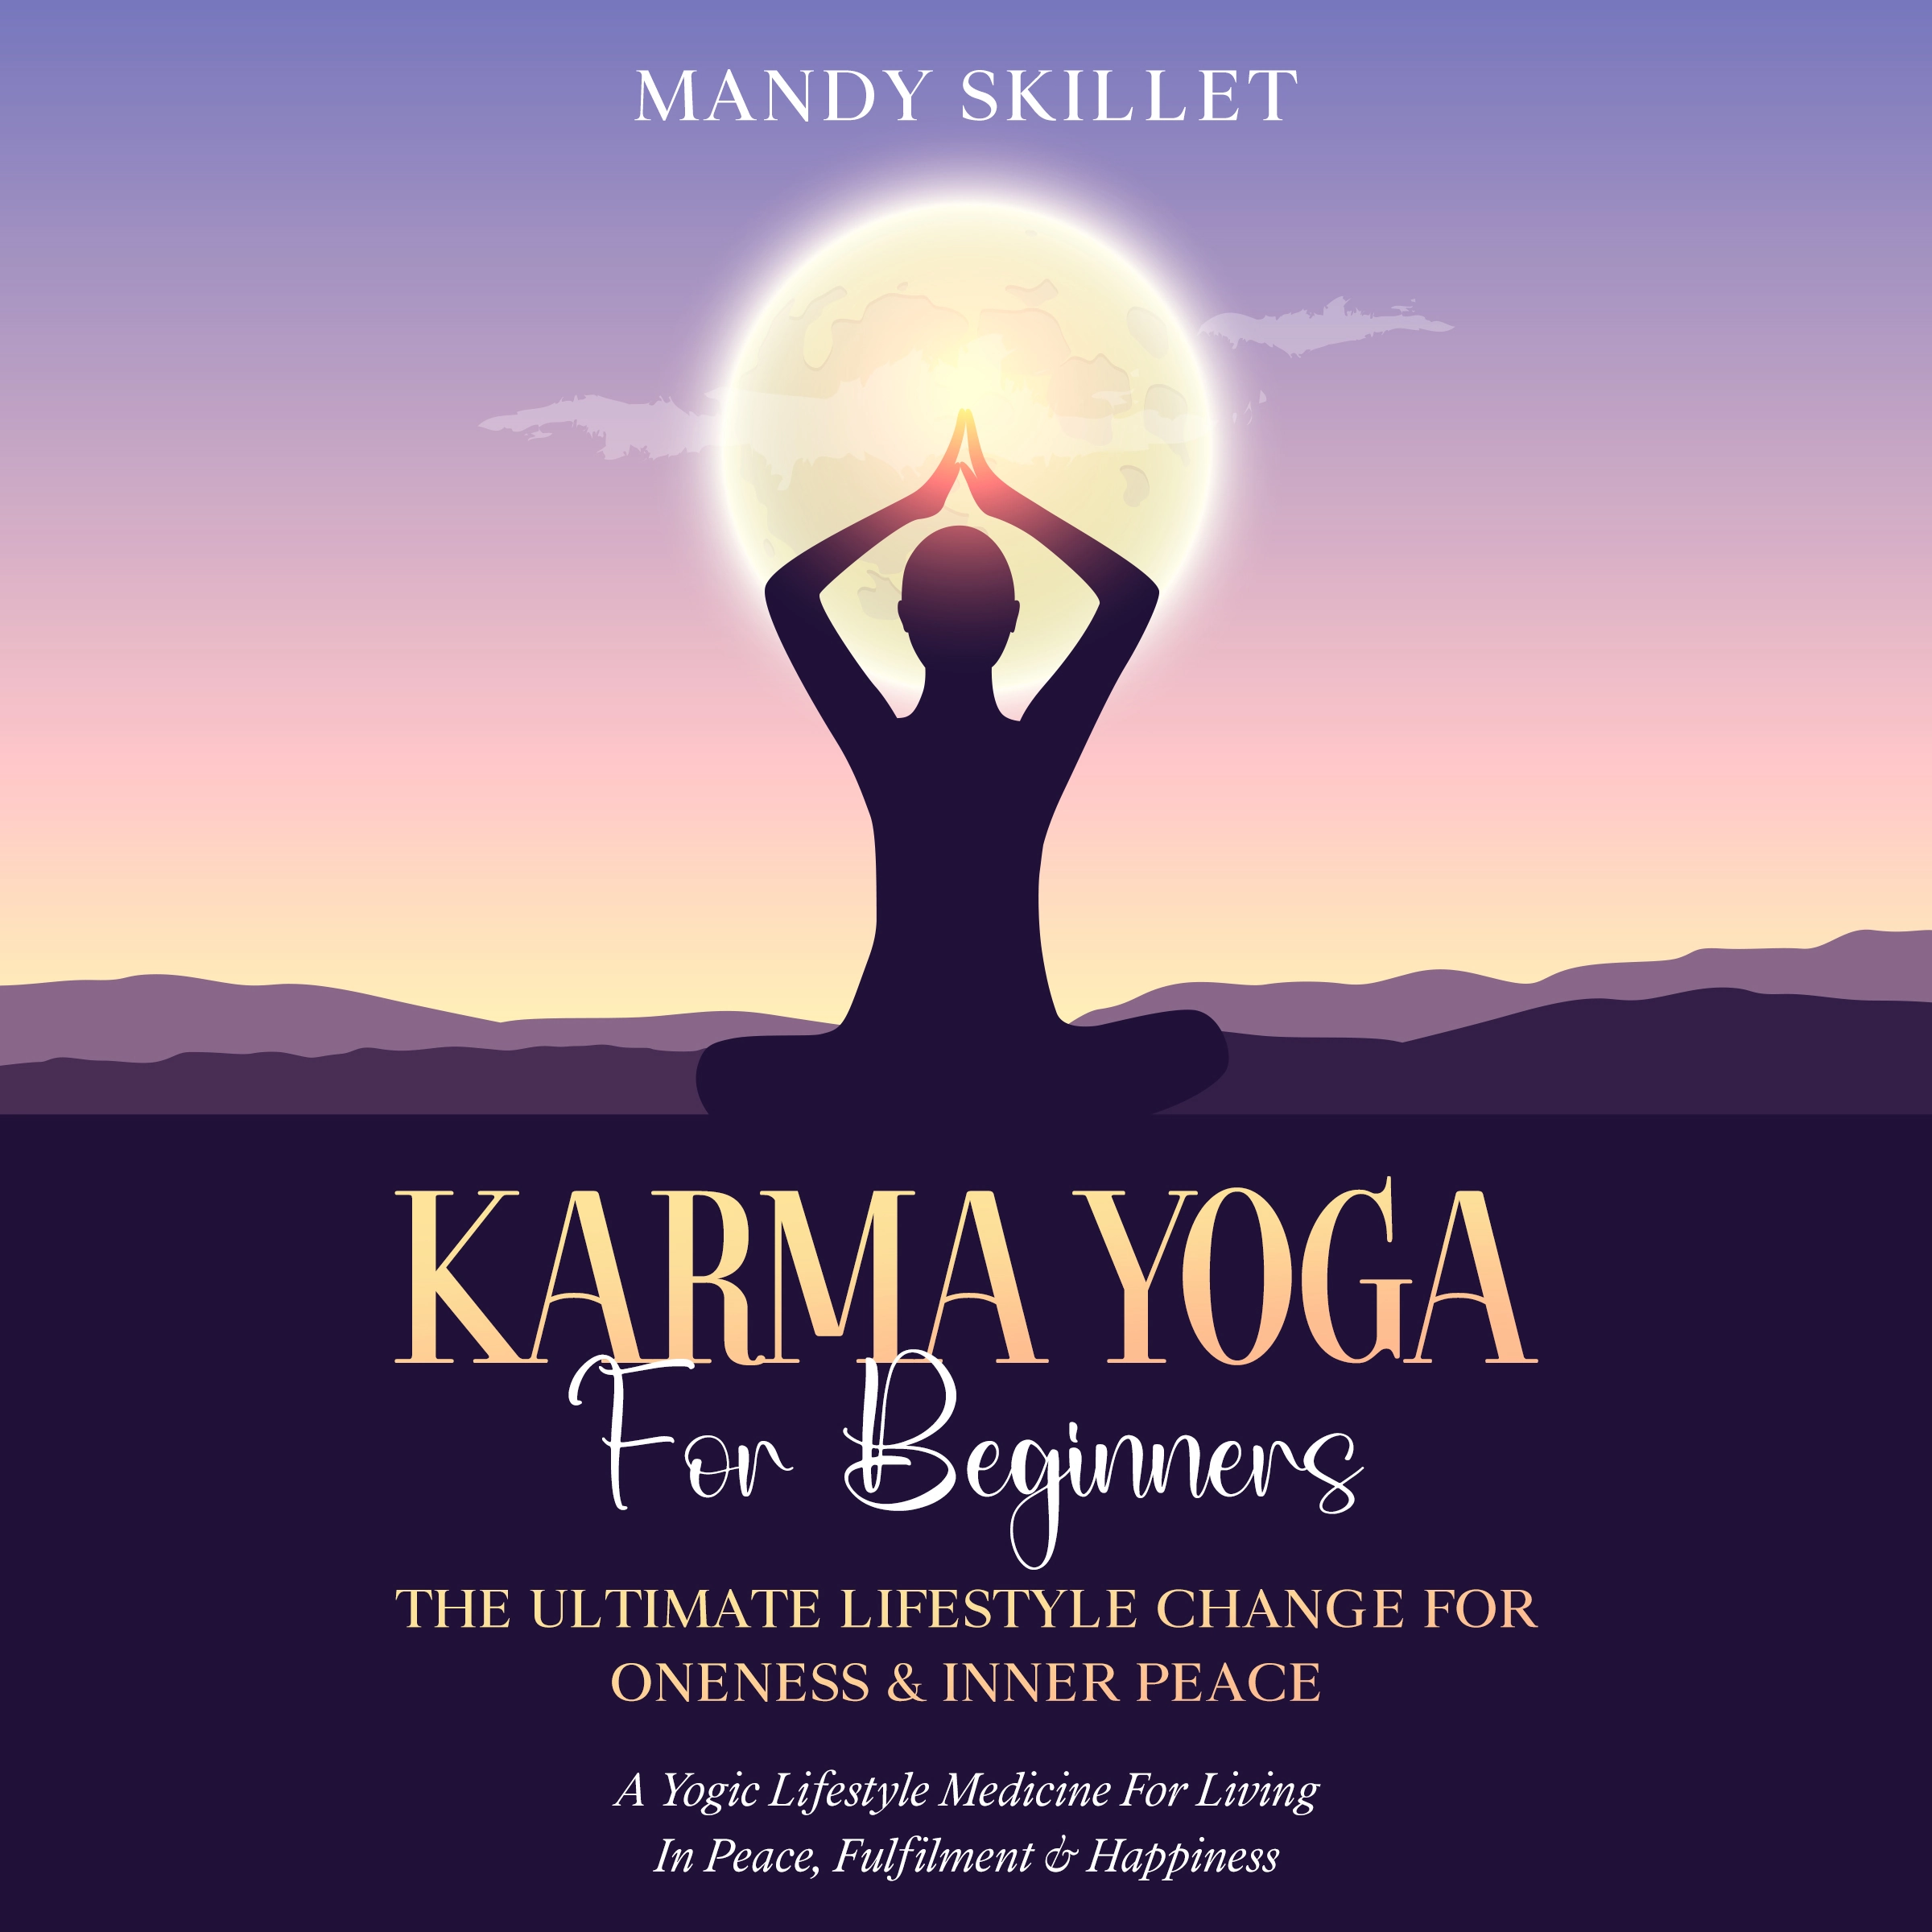 Karma Yoga For Beginners: The Ultimate Lifestyle Change For Oneness & Inner Peace by Mandy Skillet Audiobook